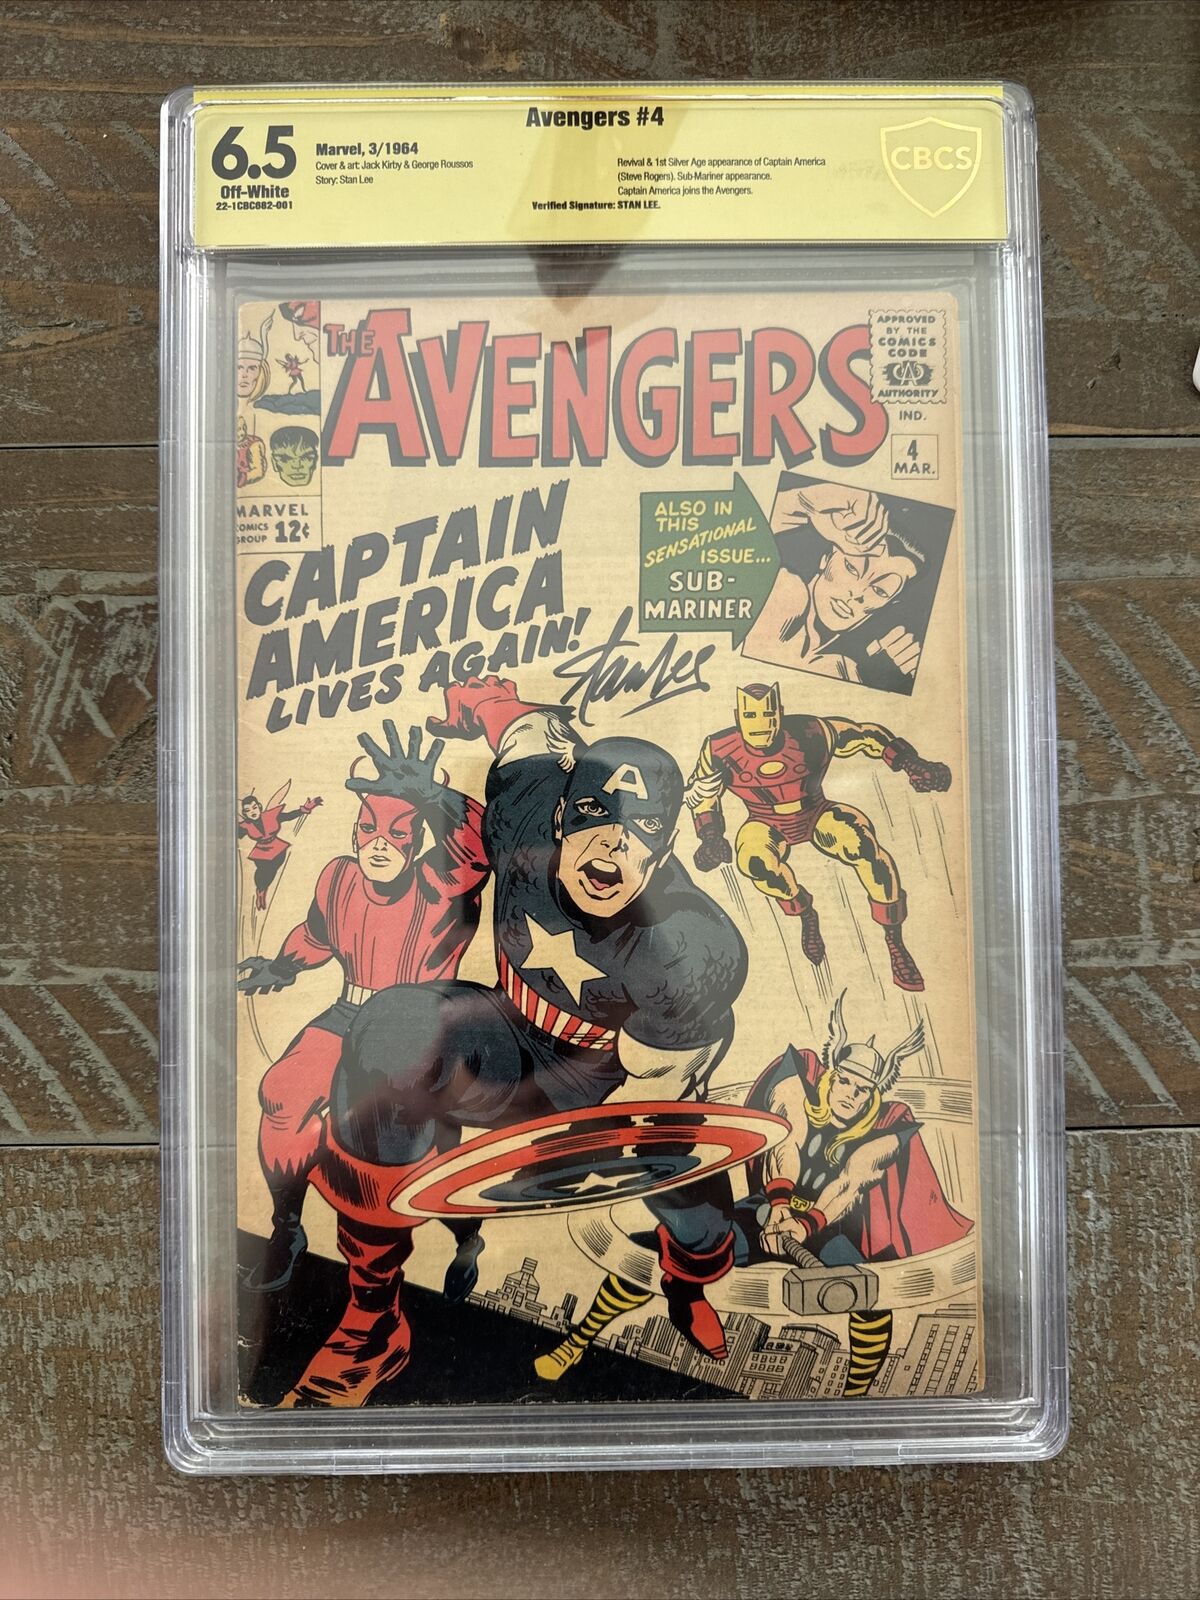 Avengers #4 CBCS 6.5 SS Signed by Stan Lee, First SA Captain America